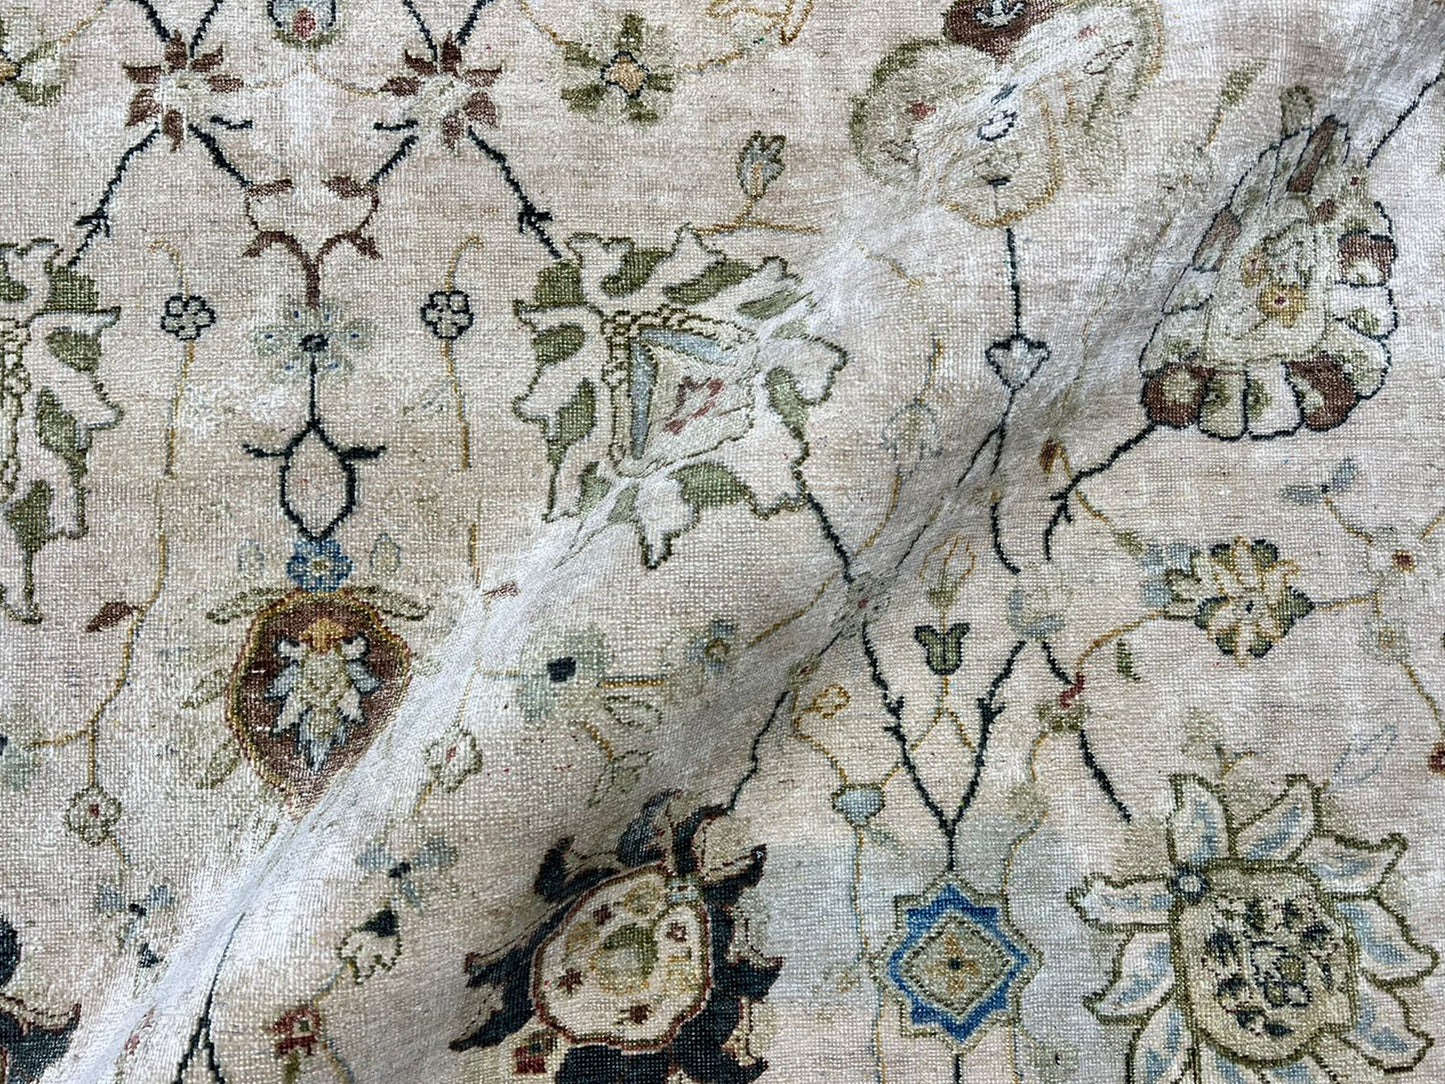 Get trendy with Ivory Multi Pure silk Transitional Handknotted Area Rug 7.9x10ft 236x305Cms - Contemporary Rugs available at Jaipur Oriental Rugs. Grab yours for $9300.00 today!